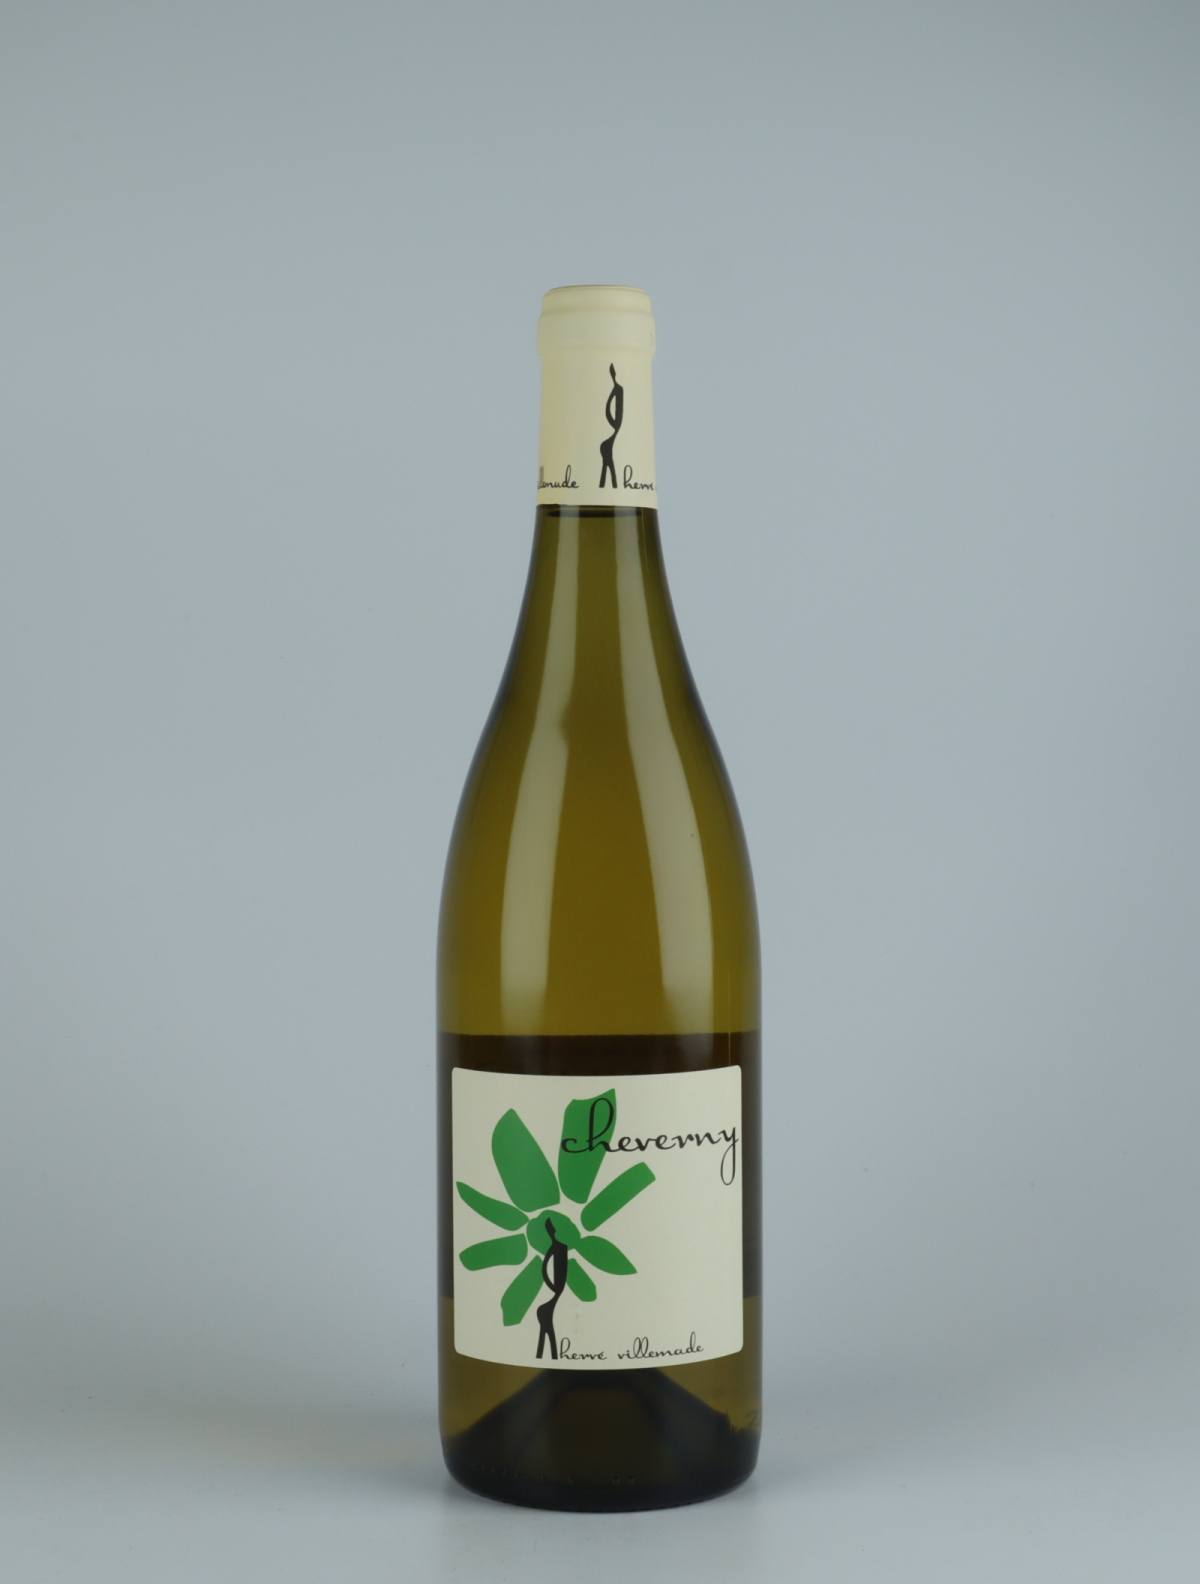 A bottle 2020 Cheverny Blanc White wine from , Loire in France